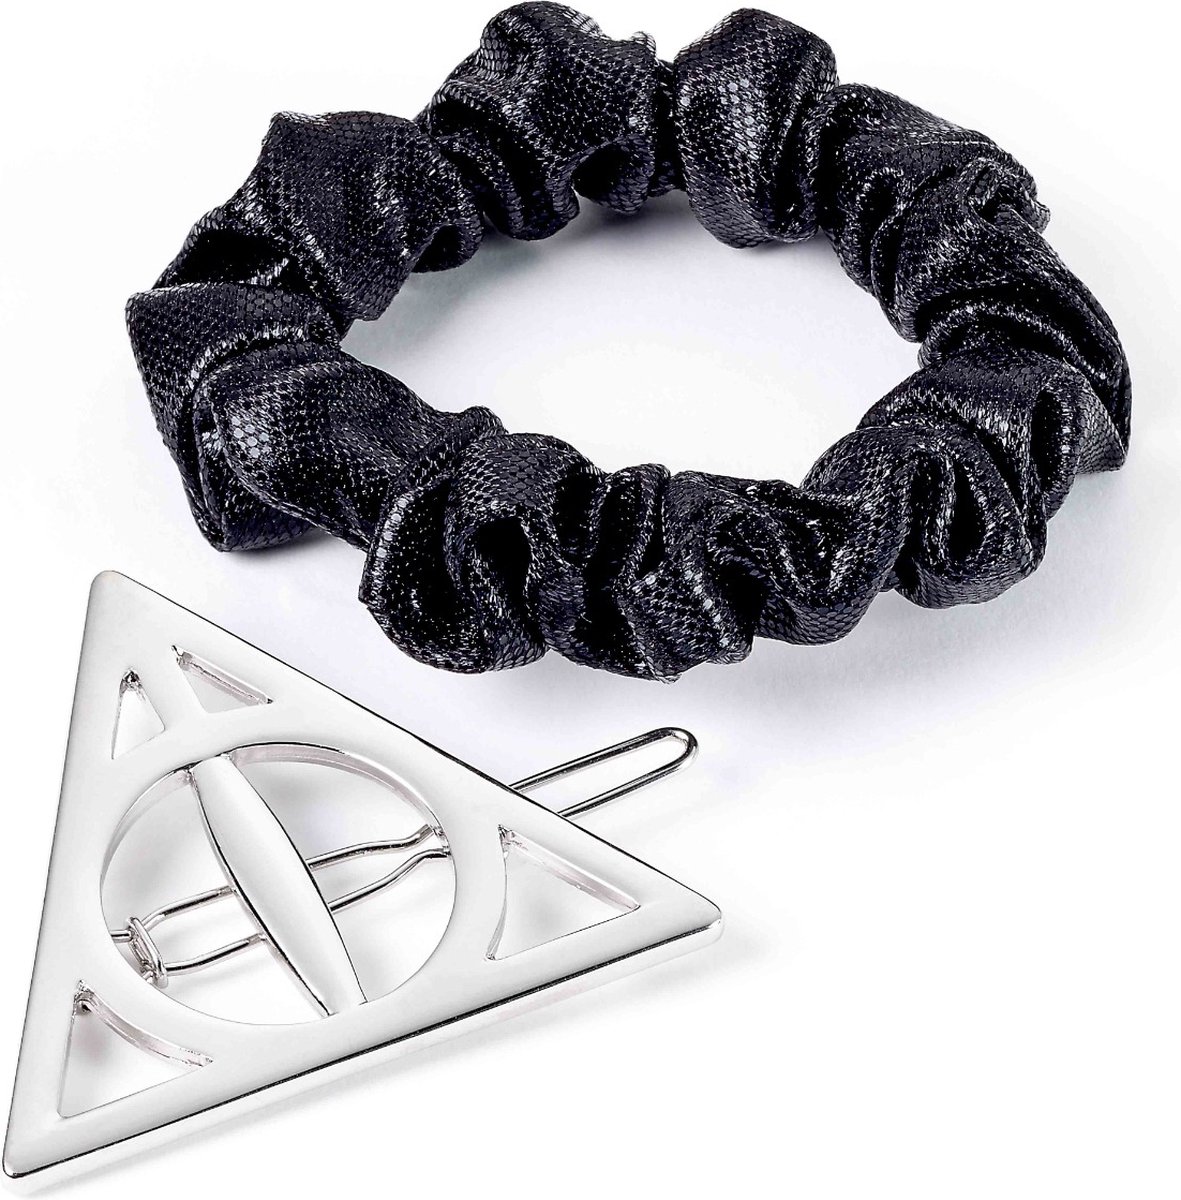 Official Harry Potter Deathly Hallows Hair Accessory Set